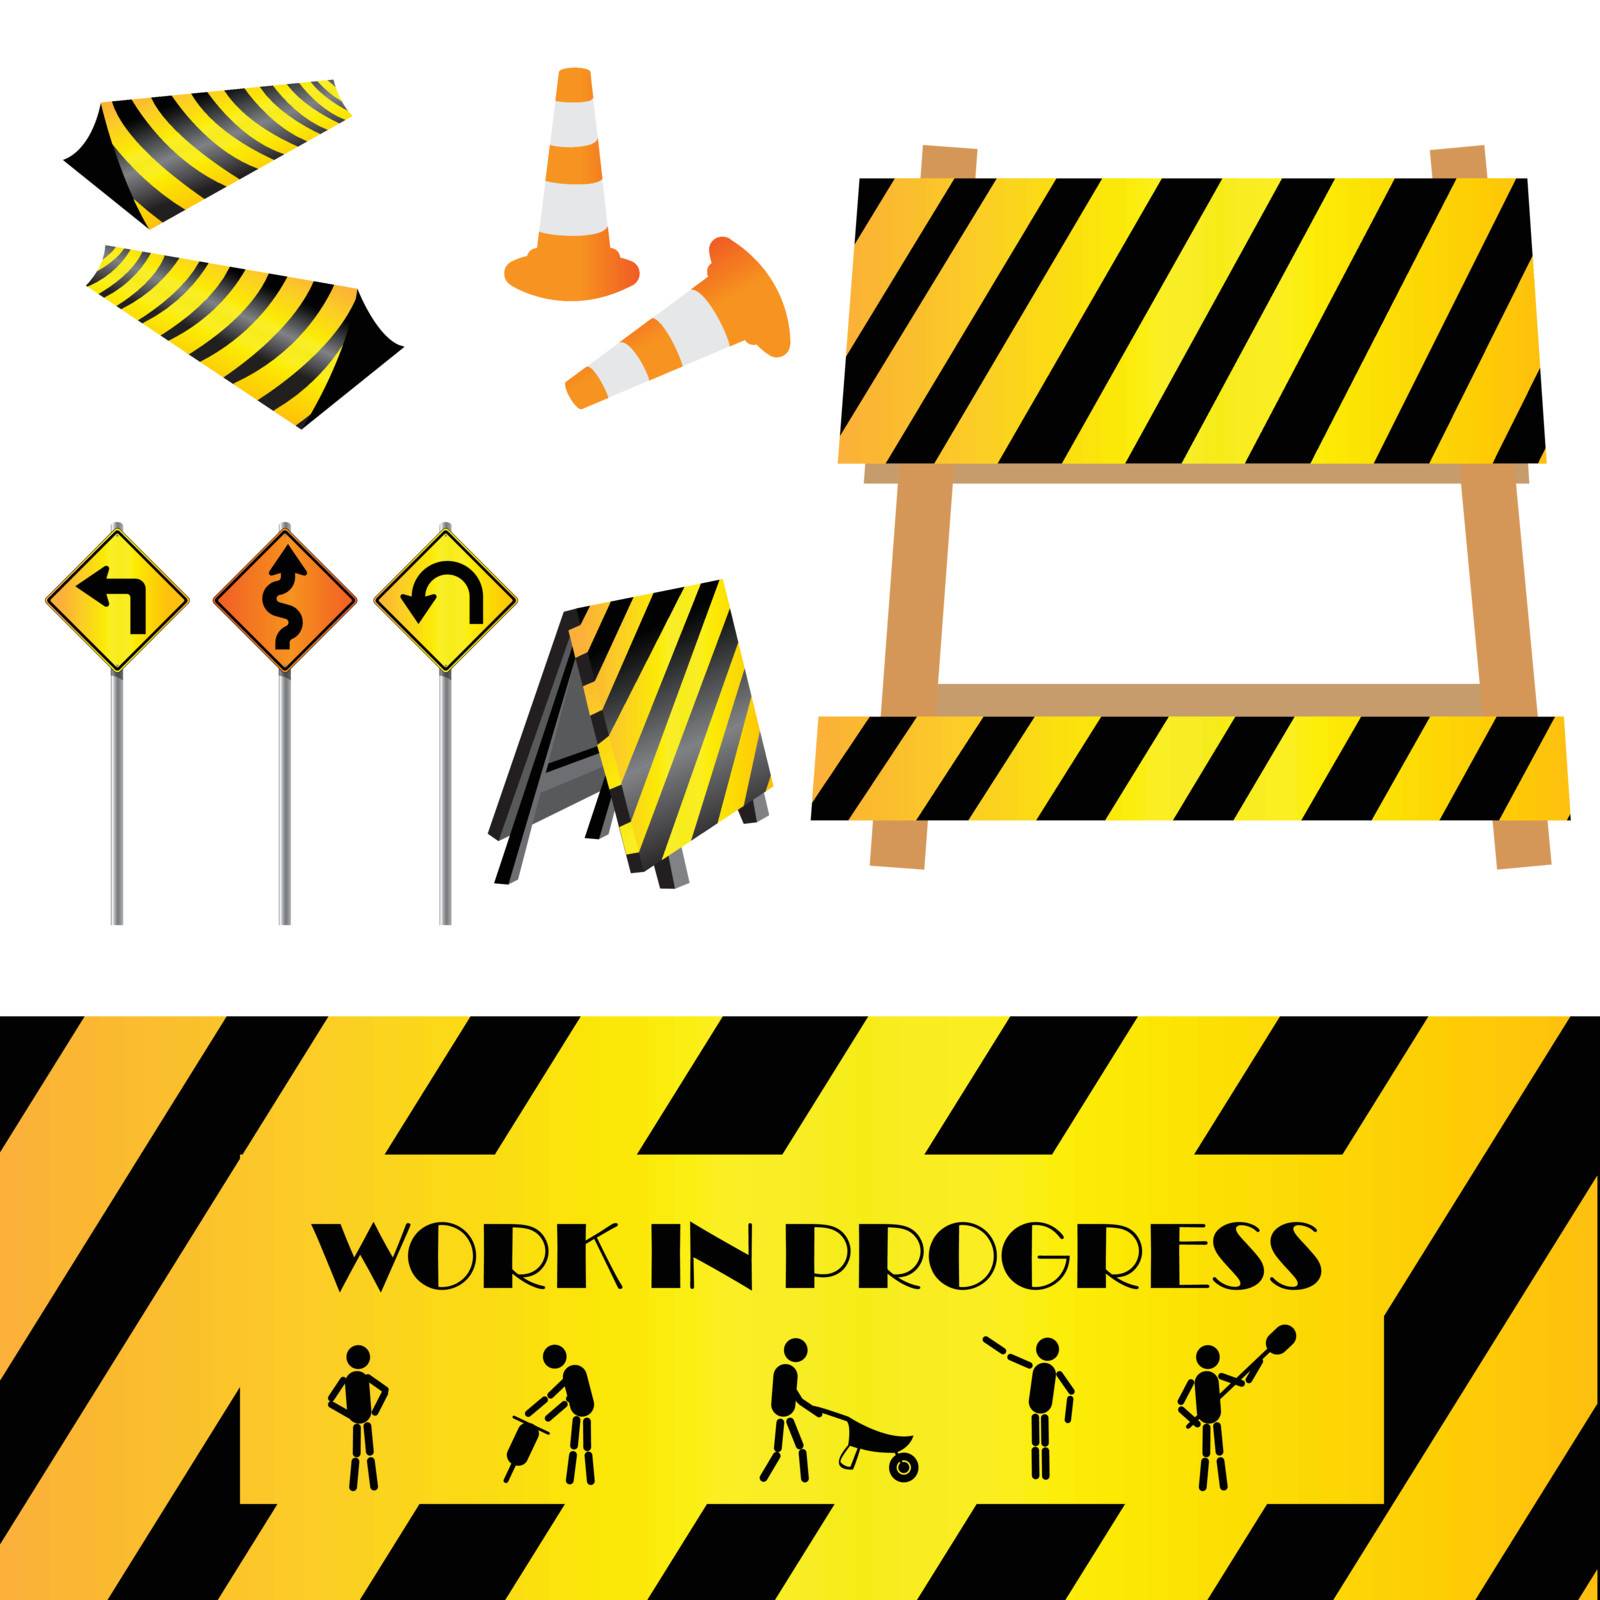 Construction warning signs, design elements